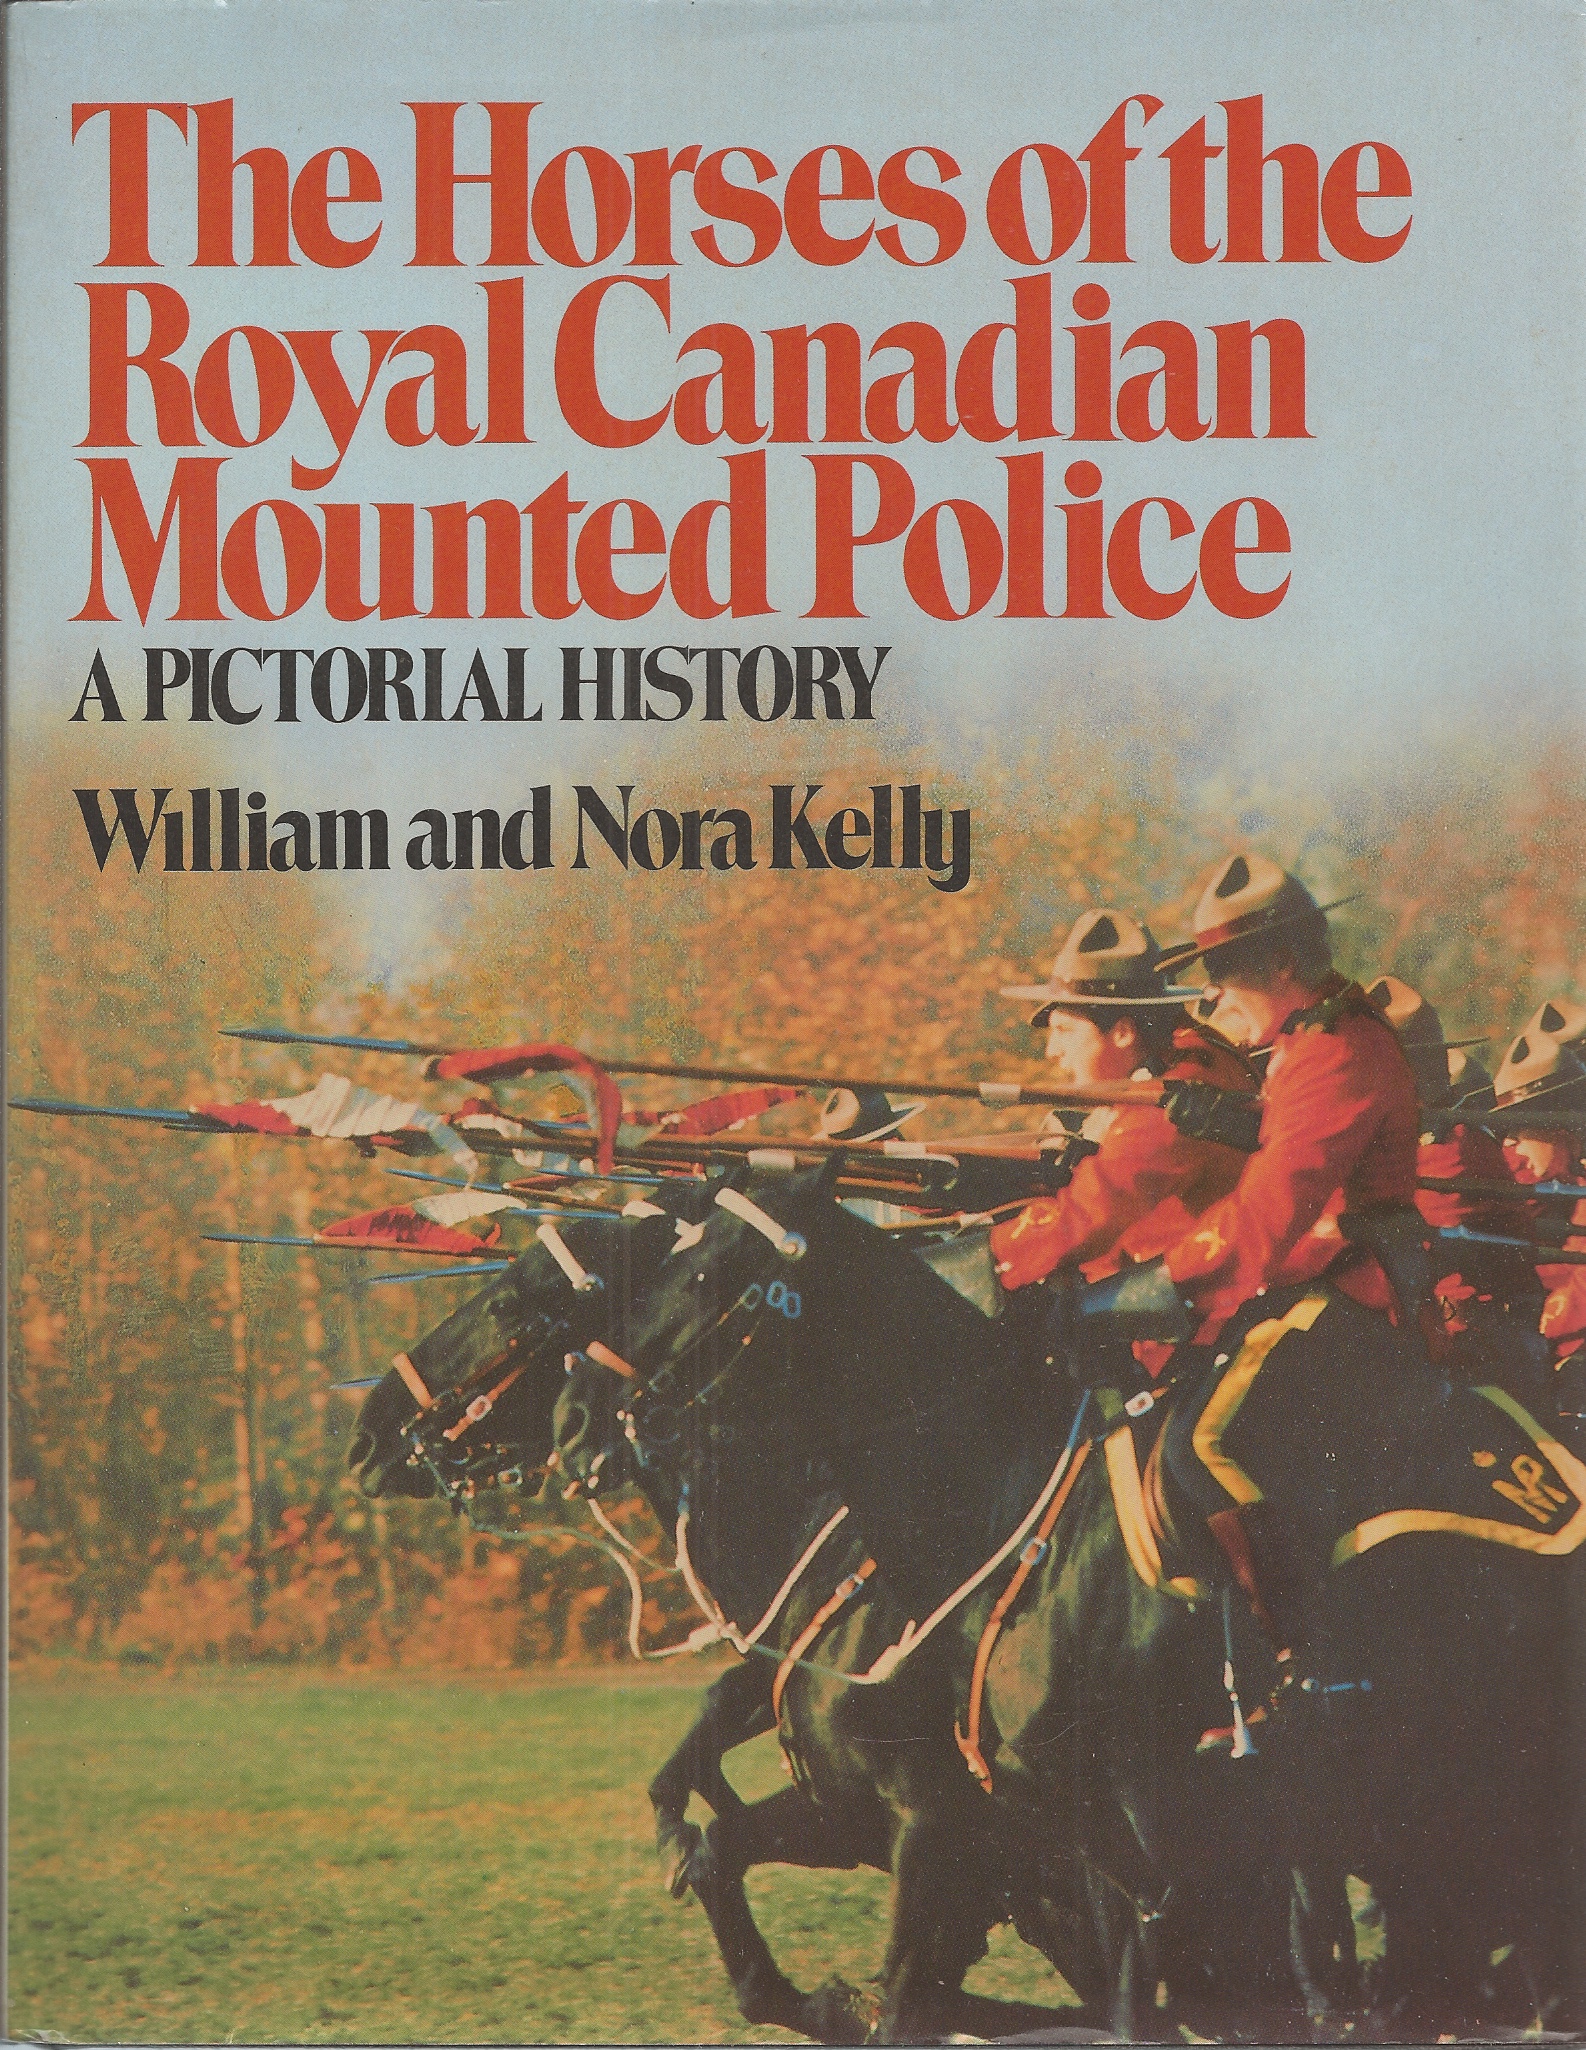 KELLY NORA & WILLIAM - Horses of the Royal Canadian Mounted Police